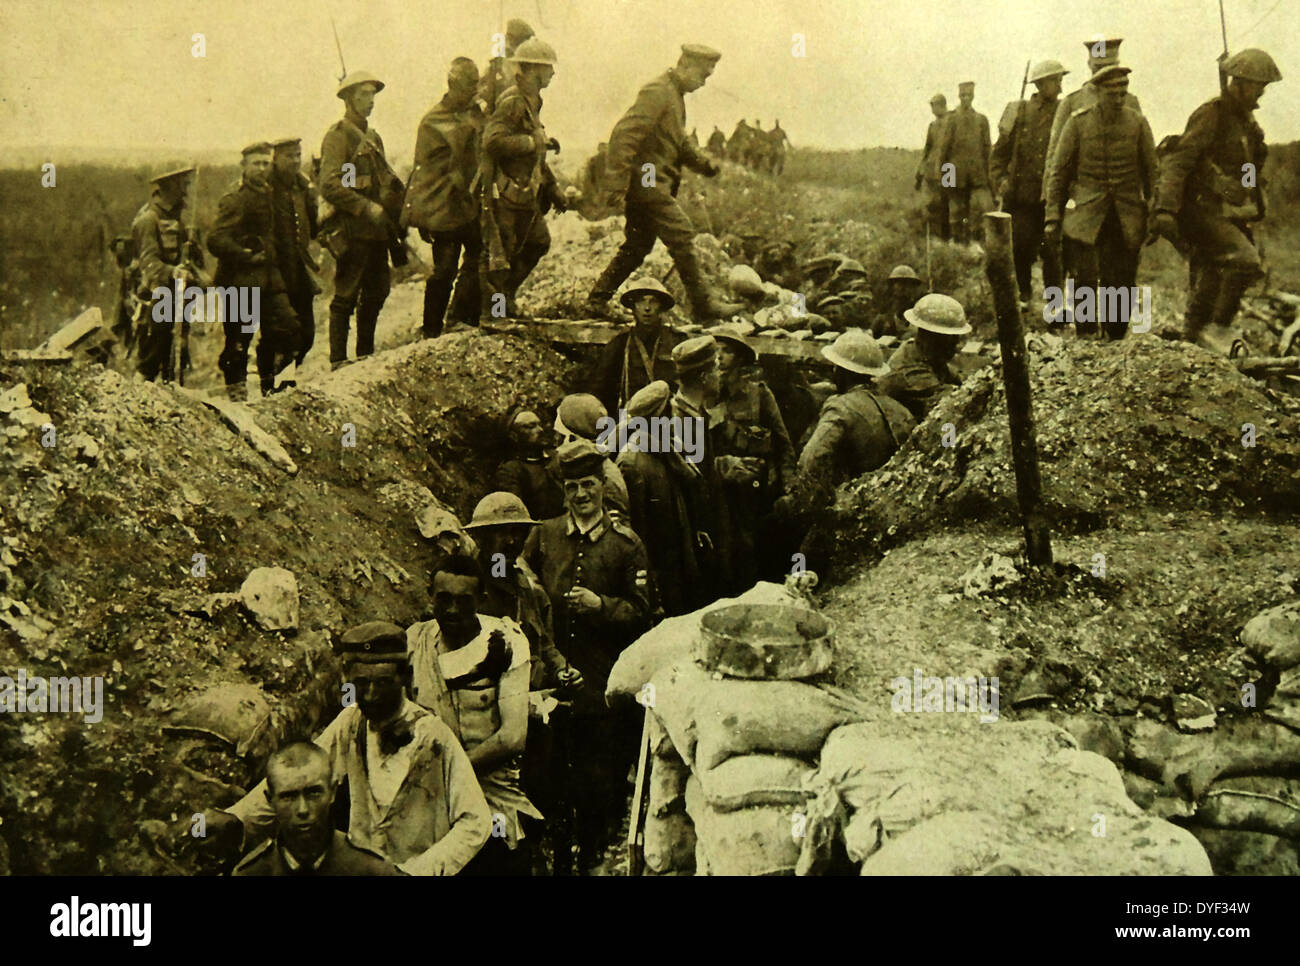 German prisoners of war in France, marched through trenches by advancing British forces, during world war one. 1915 Stock Photo